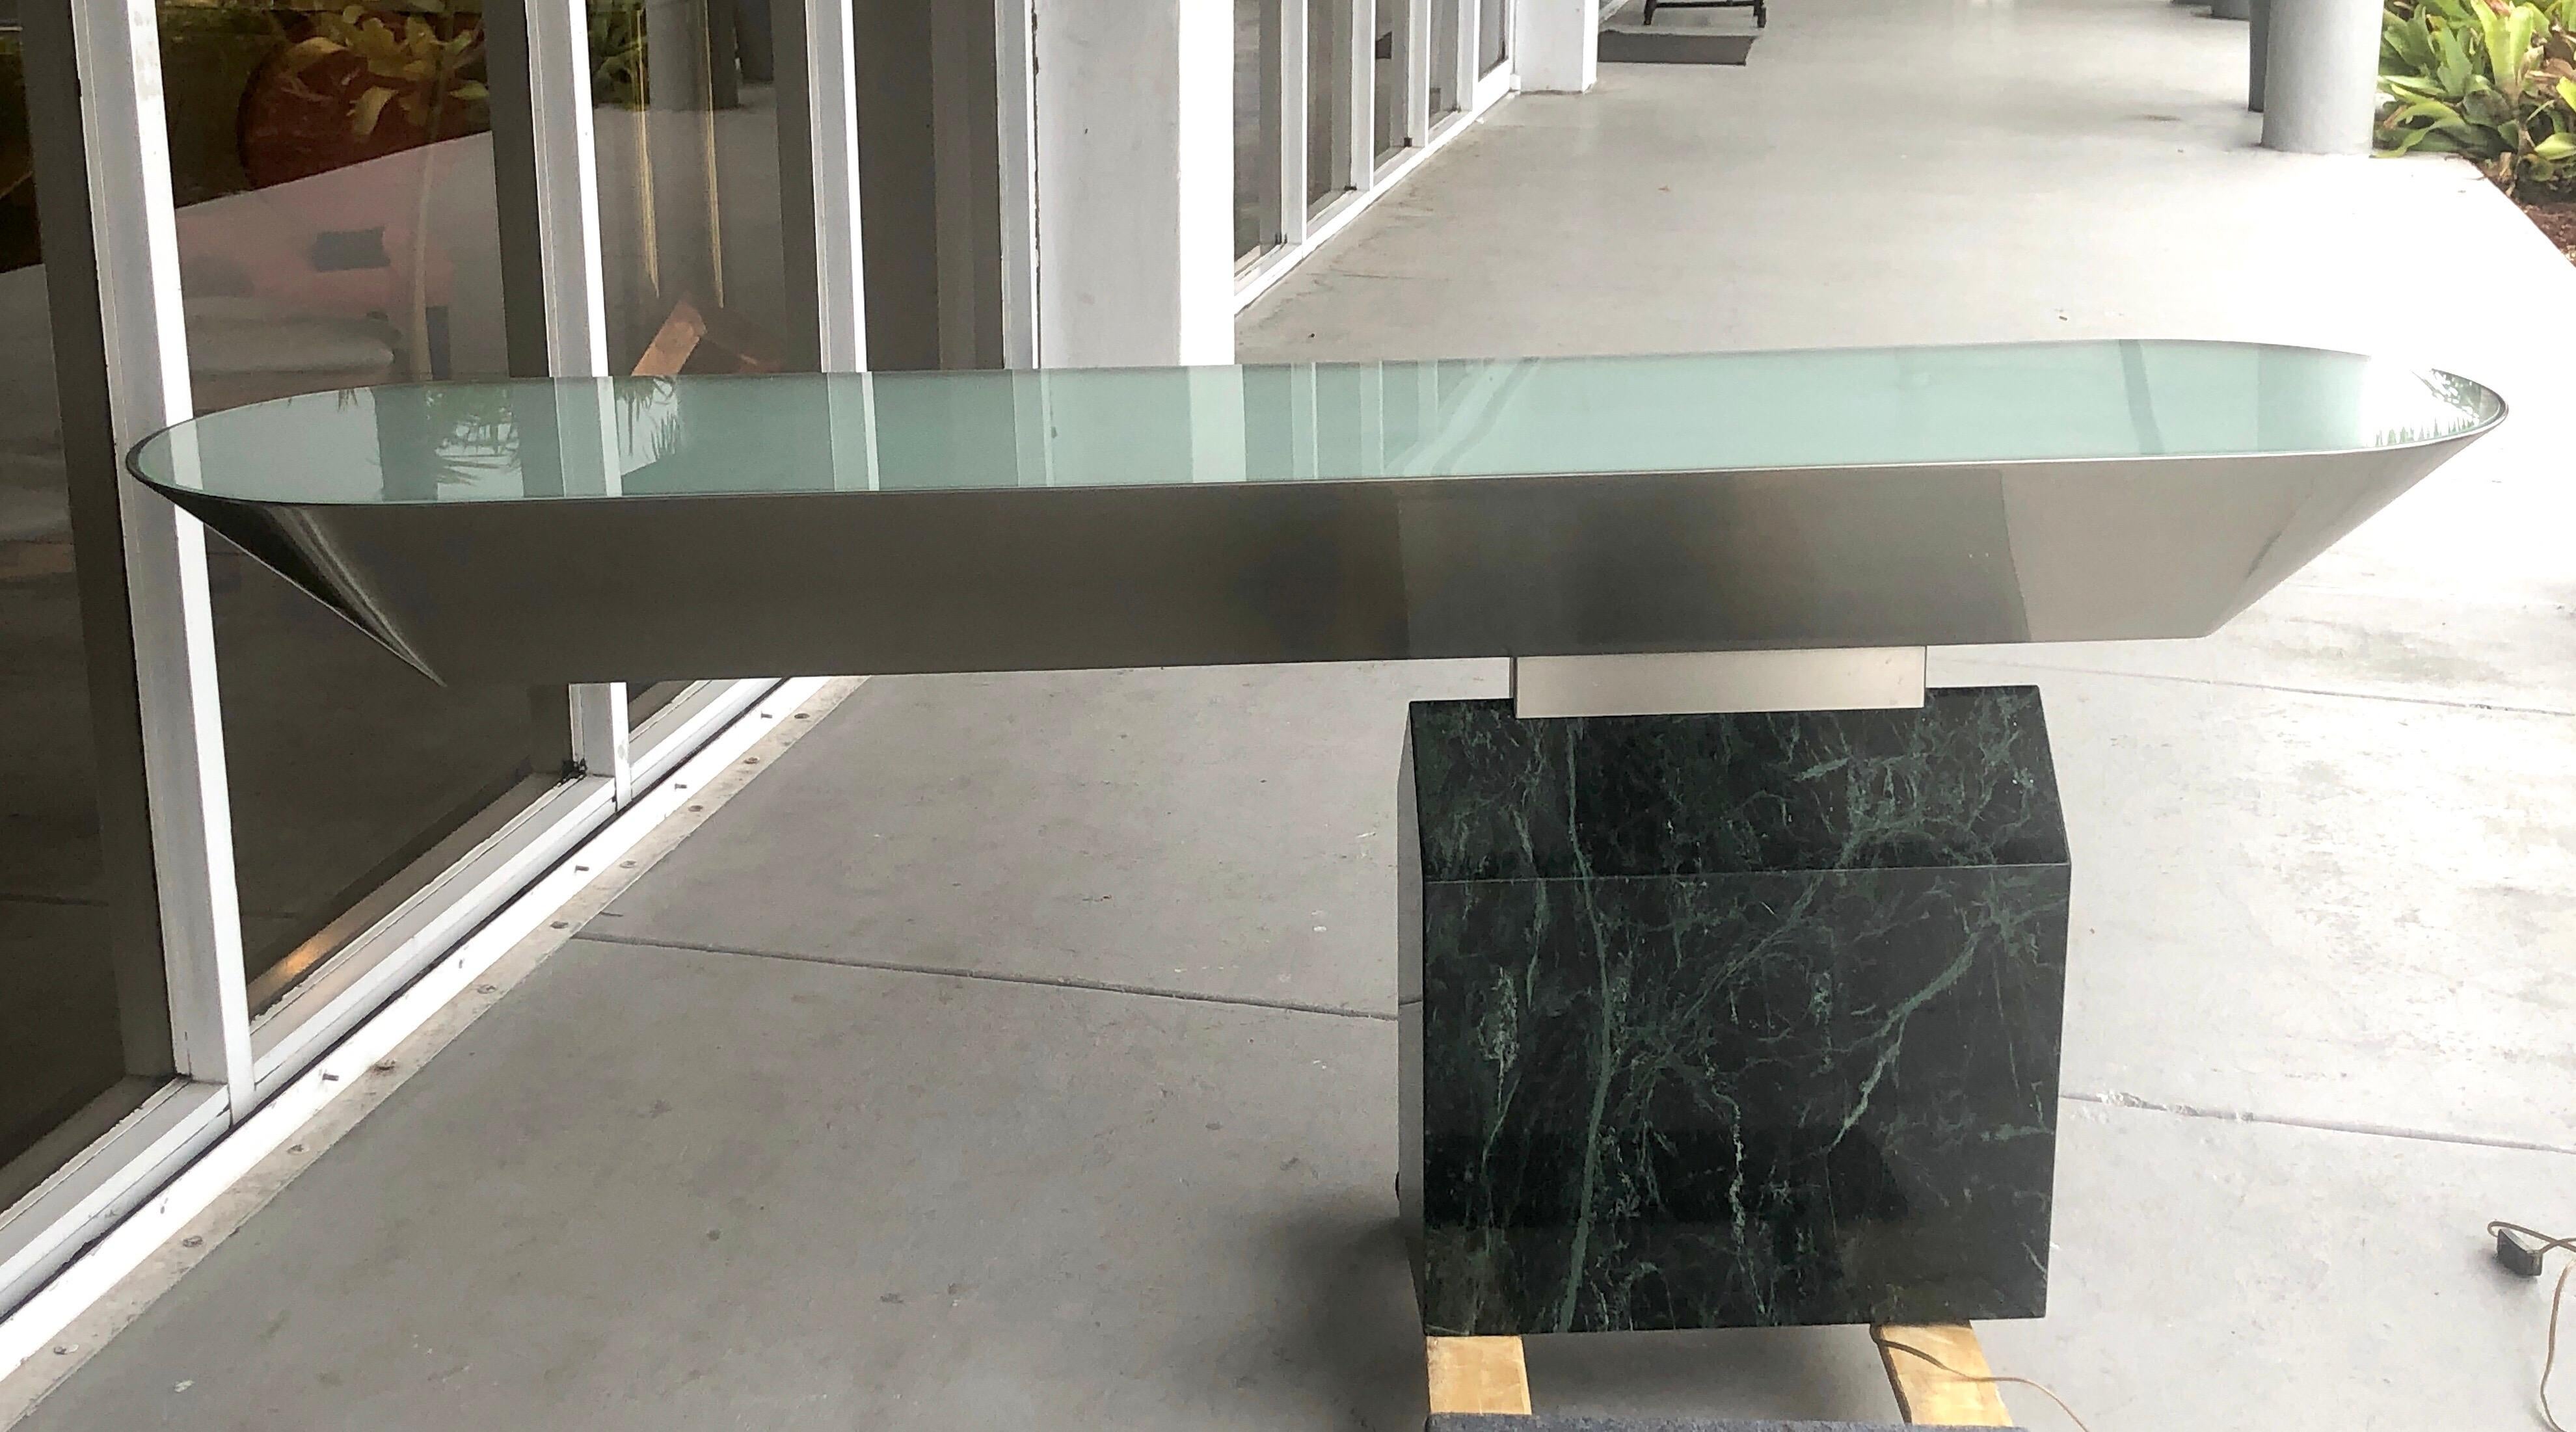 A wonderful illuminated console be Brueton. Designed by J. Wade Beam. This console has a green marble base and the stainless top has a custom satin finish, not the very polished mirror finish you usually see. Outstanding design.